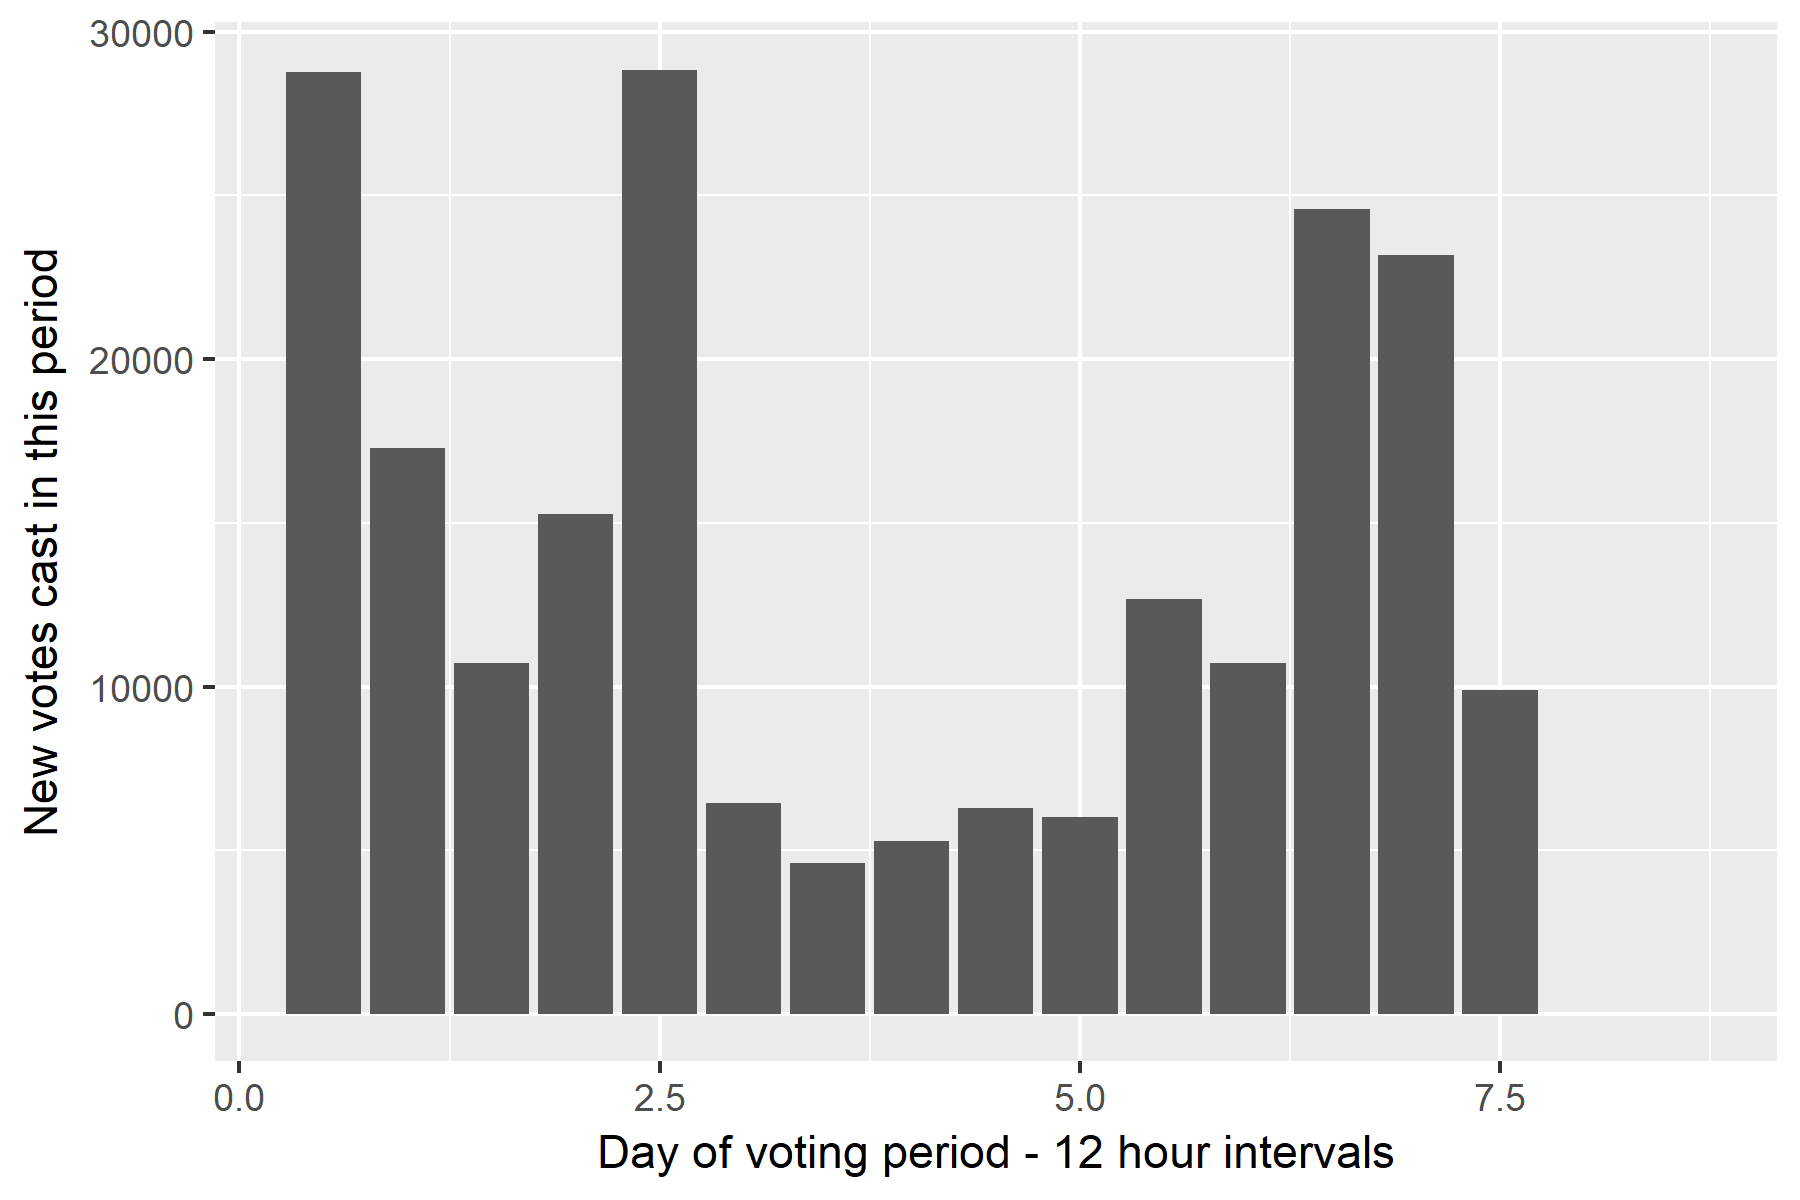 Bar chart showing number of new votes per 12 hour interval during the voting period